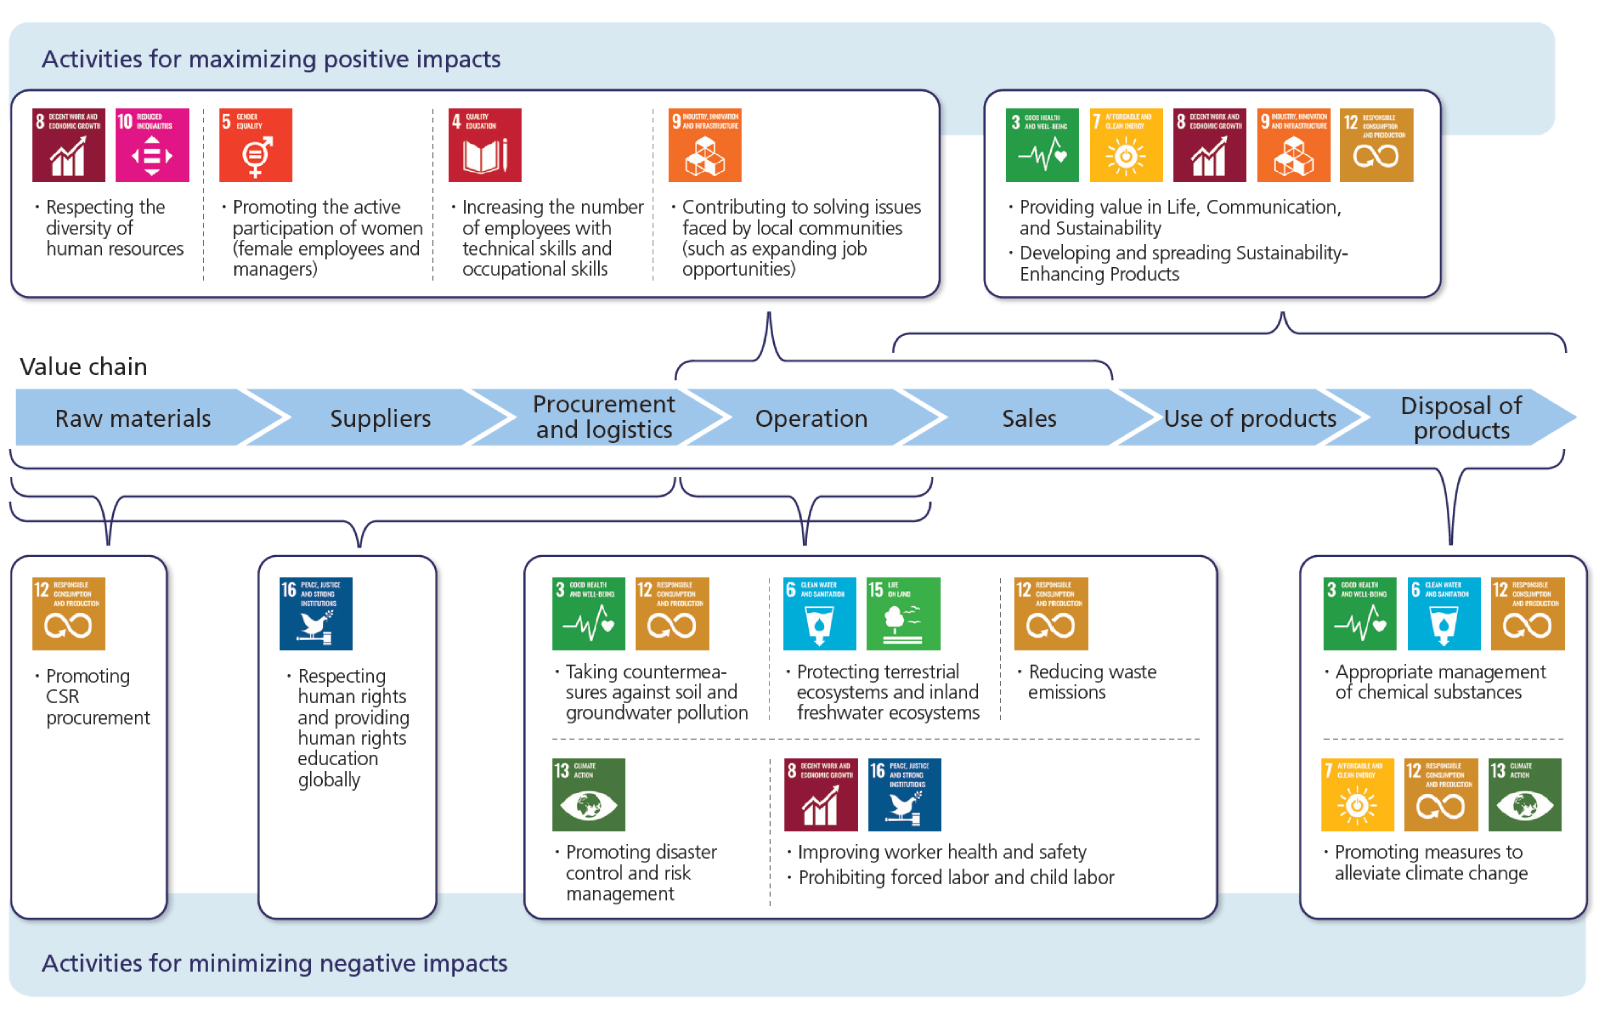 Relationship with SDGs in the value chain